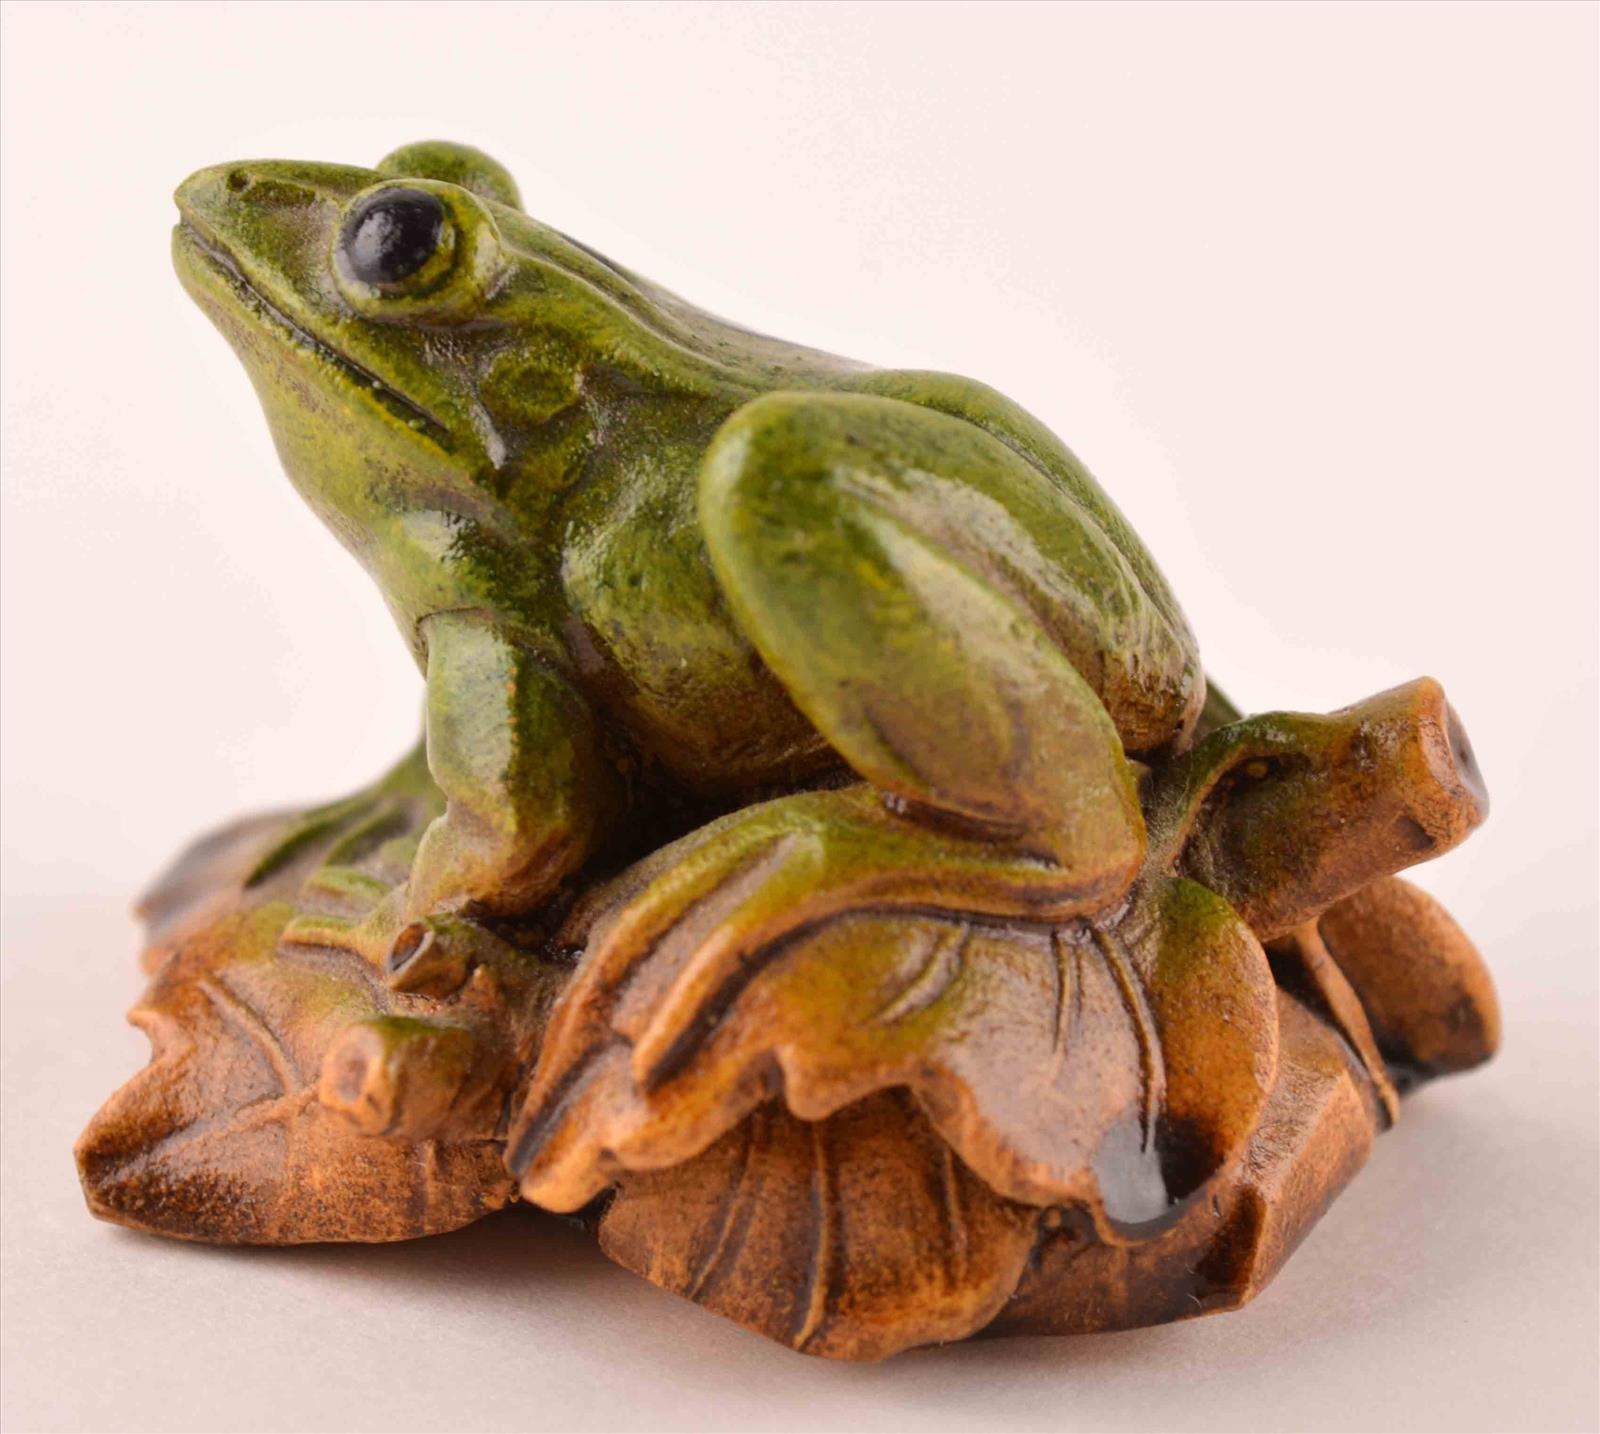 Frosch Asien 20. Jhd. / Frog Asia, 20th centuryHolz/Masse ?, farbig staffiert, ca. 3,8 cm x 5,5 cm x - Image 2 of 3